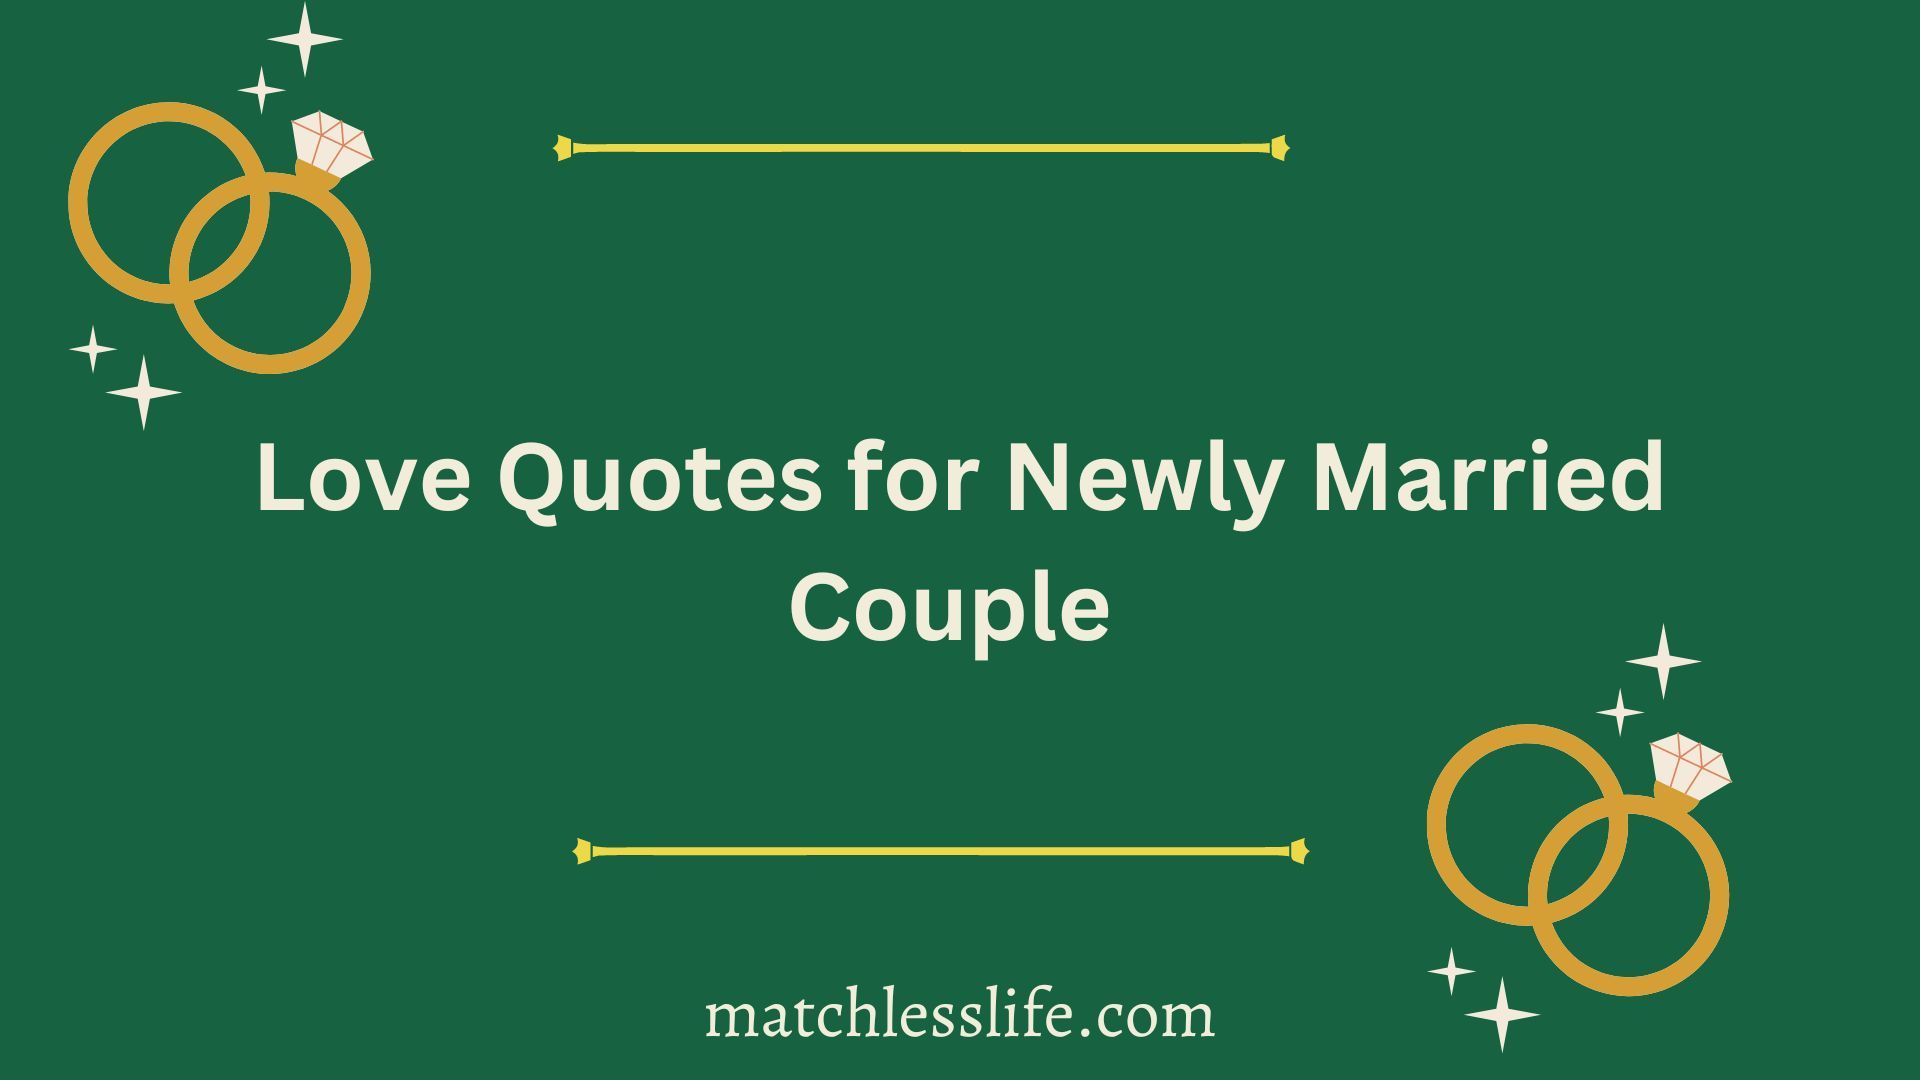 60 Love Quotes For Newly Married Couple For Successful Marriage Matchlesslife